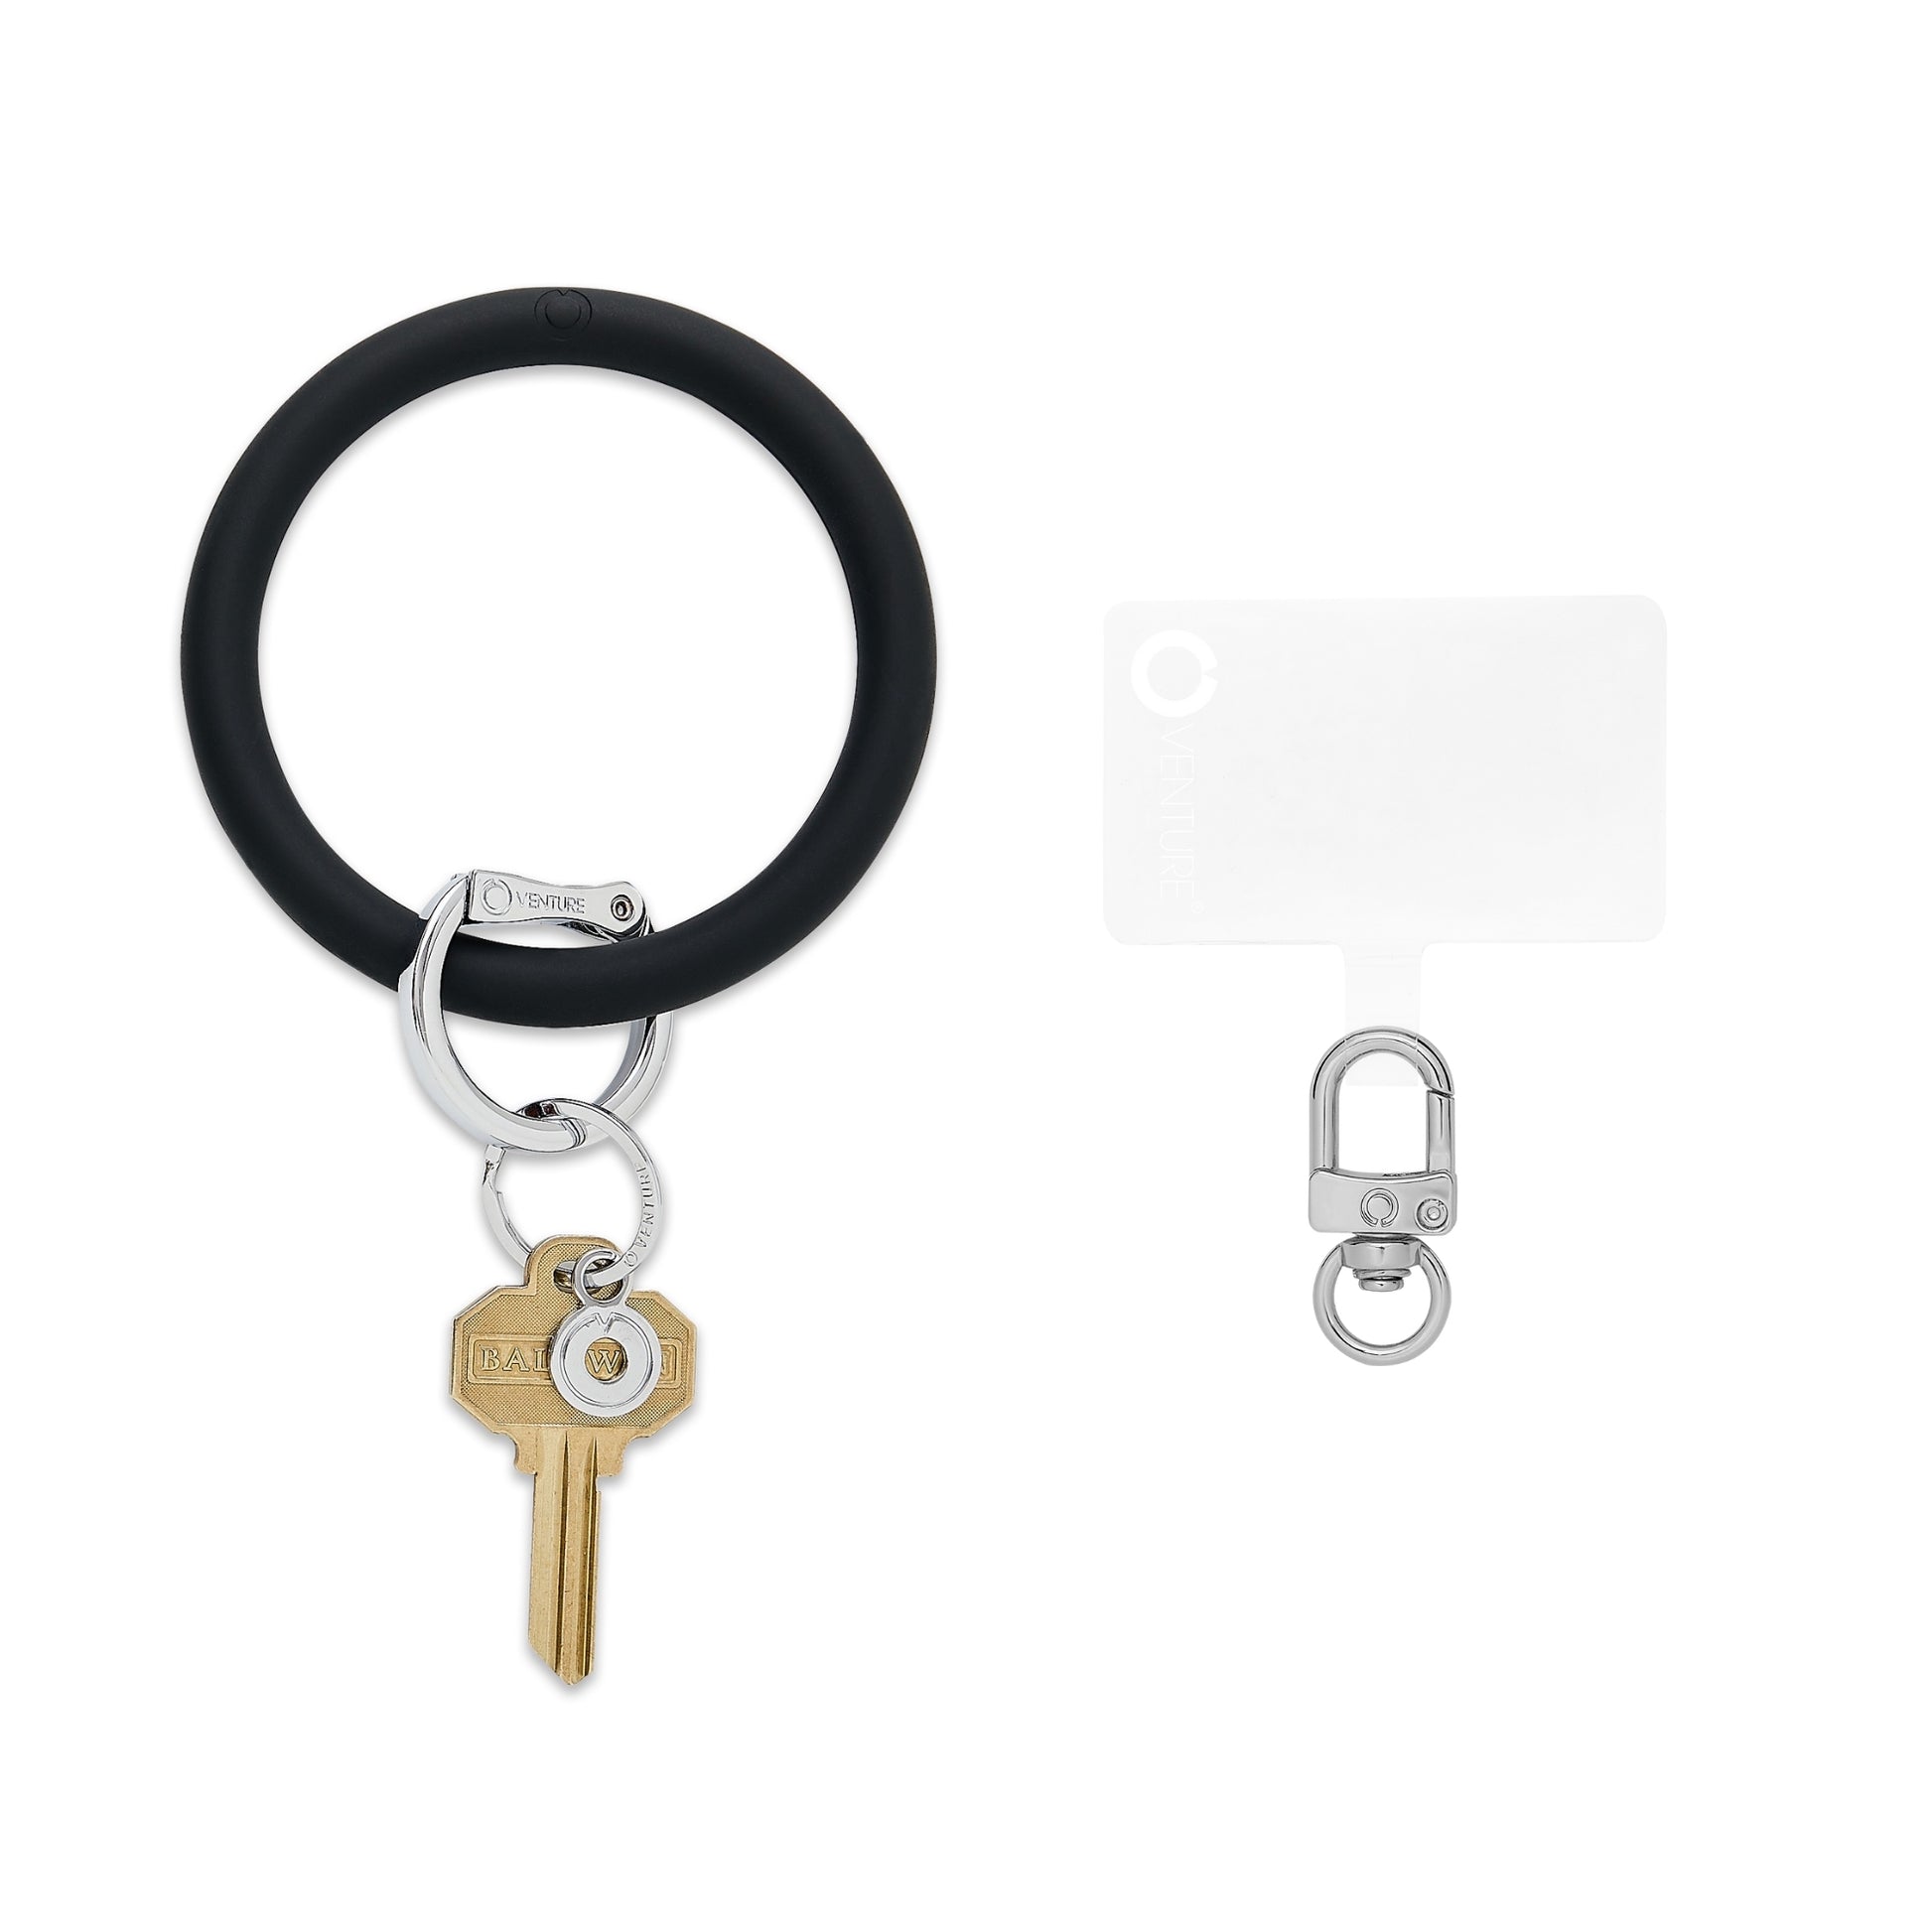 Back in Black Big O Key Ring and Phone Connector Oventure